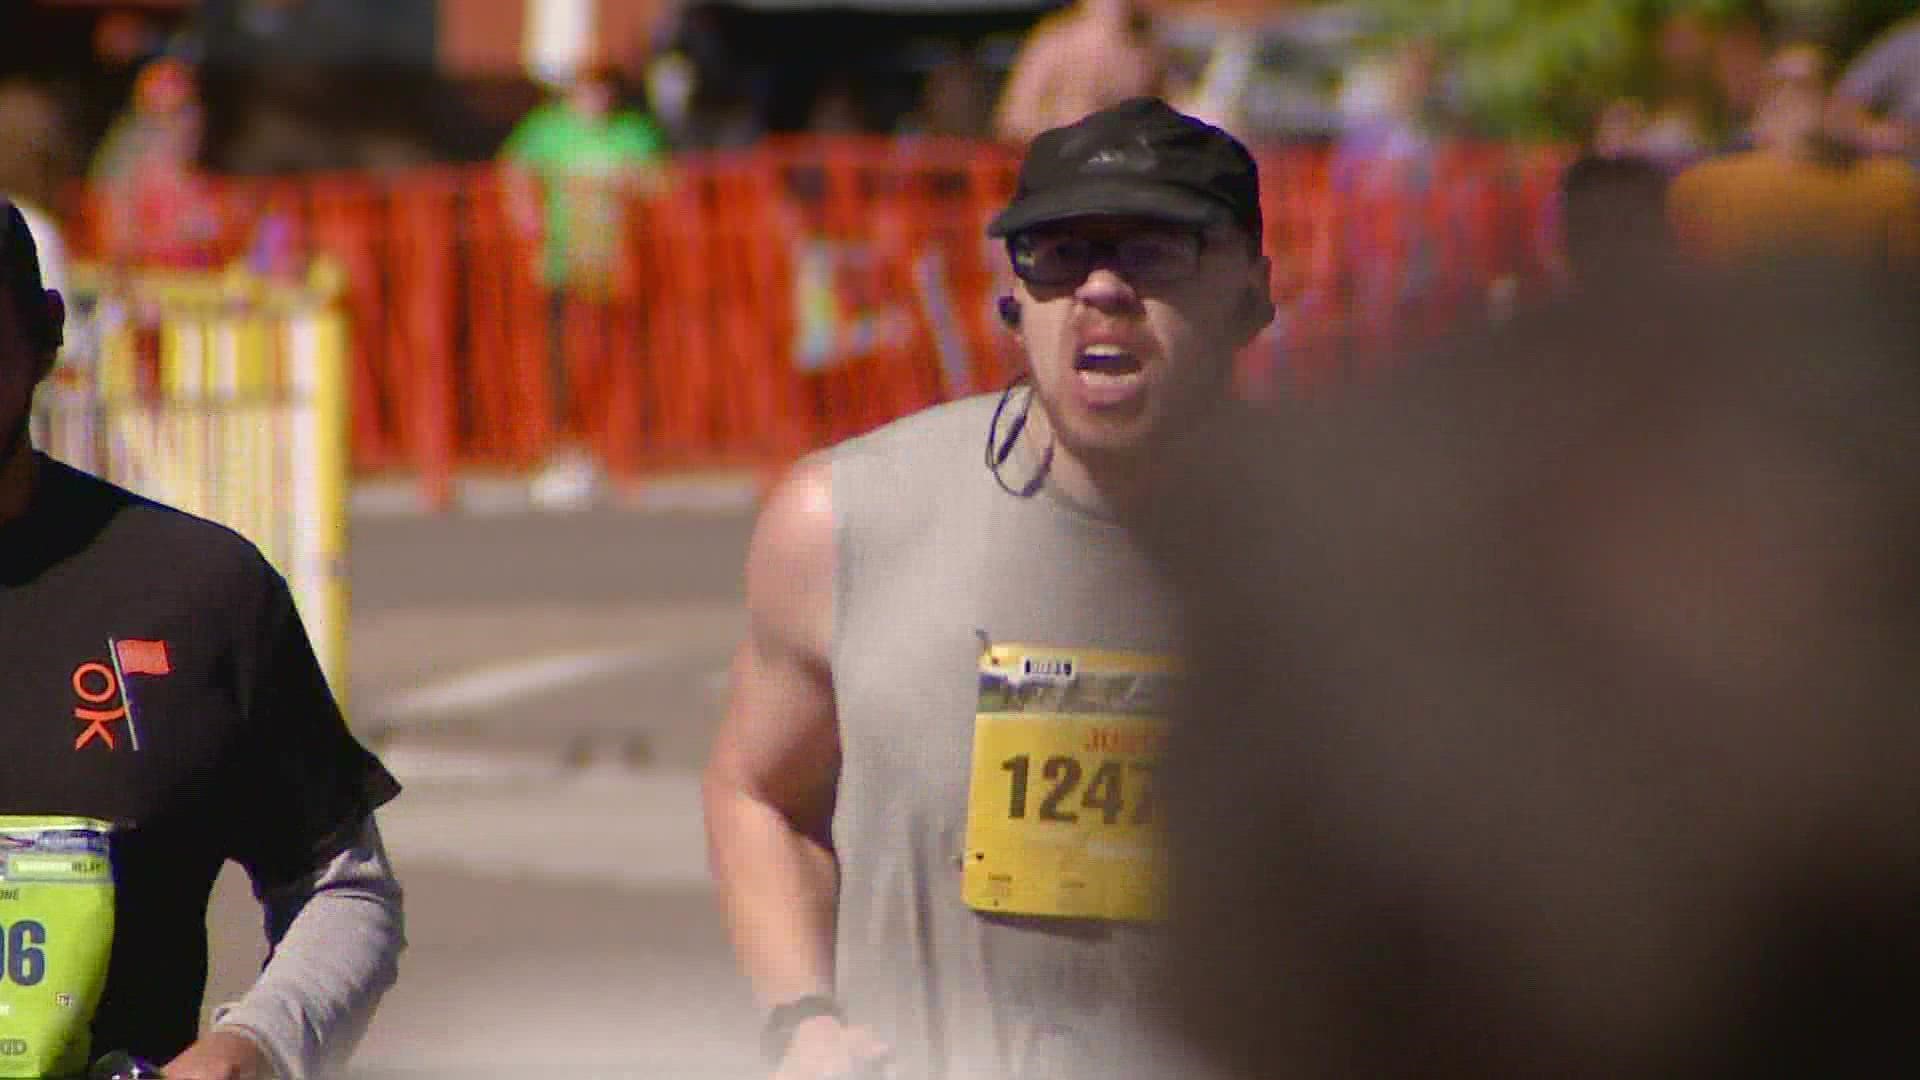 More than 20,000 runners are expected to be at the Colfax Marathon in Denver this weekend.